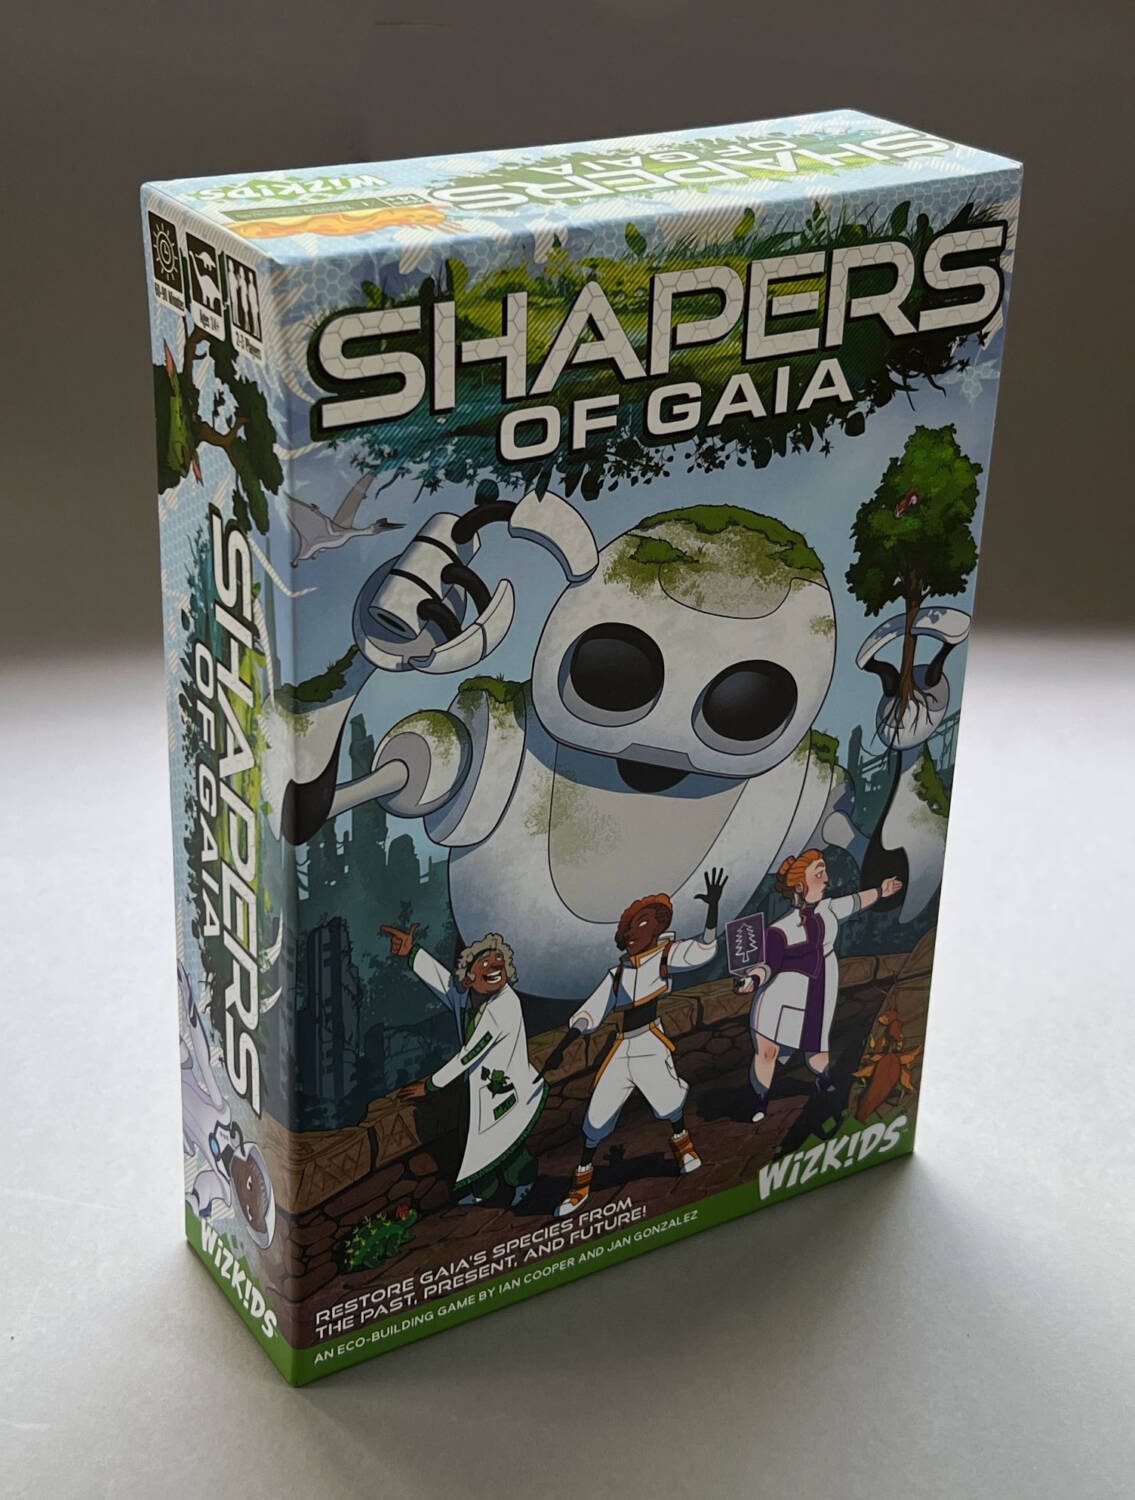 Shapers of Gaia: The Box